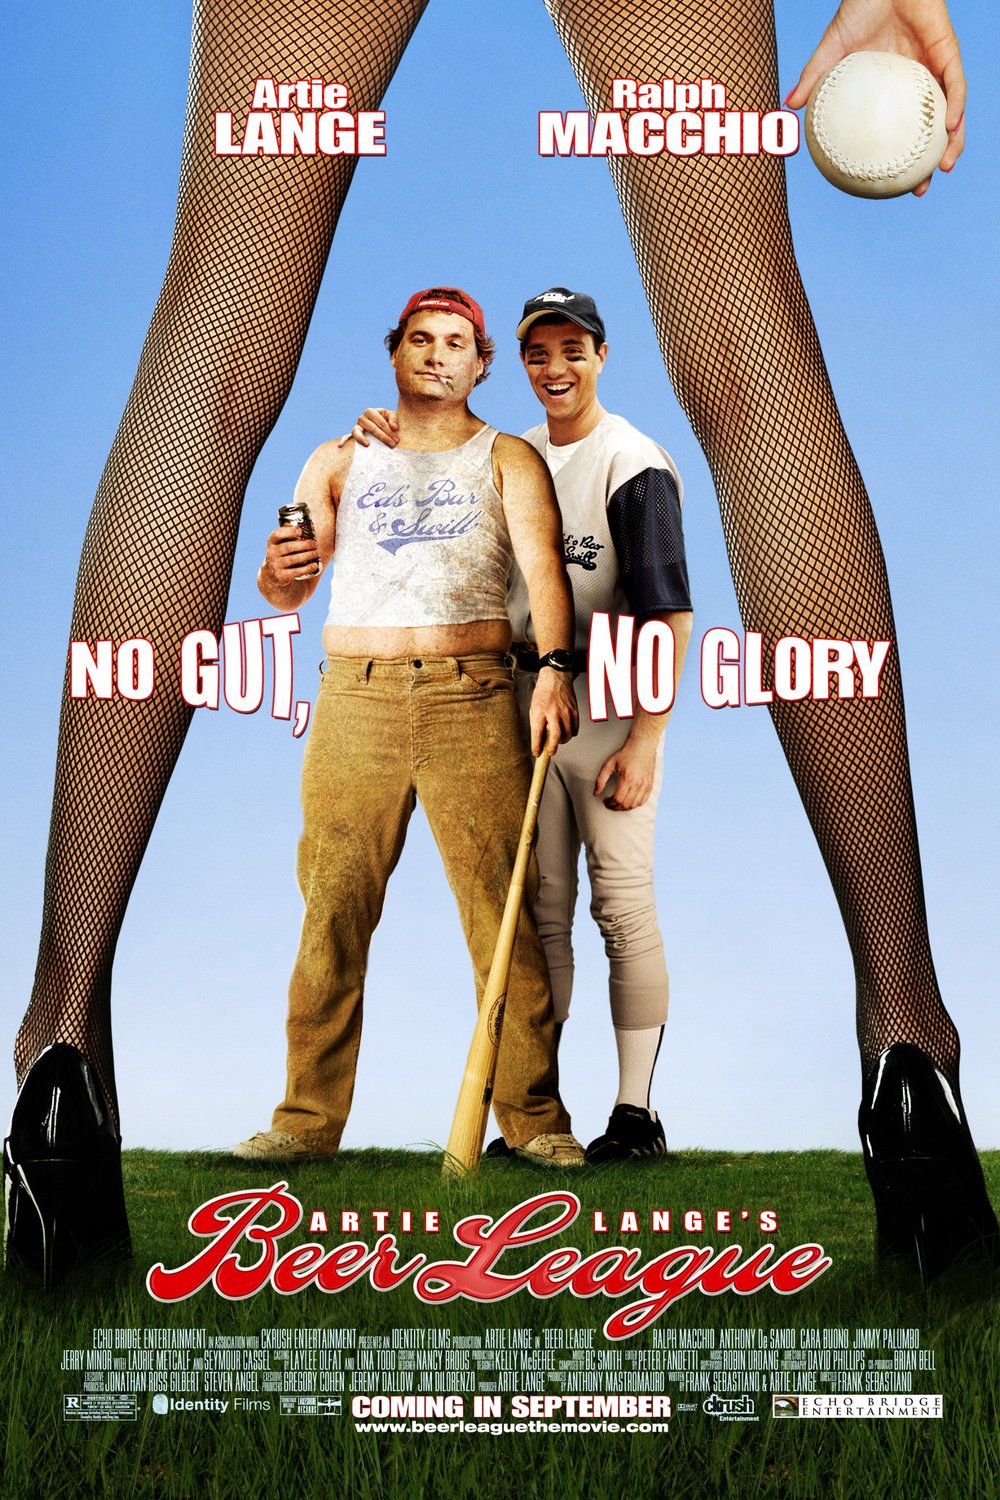 Poster of the movie Beer League